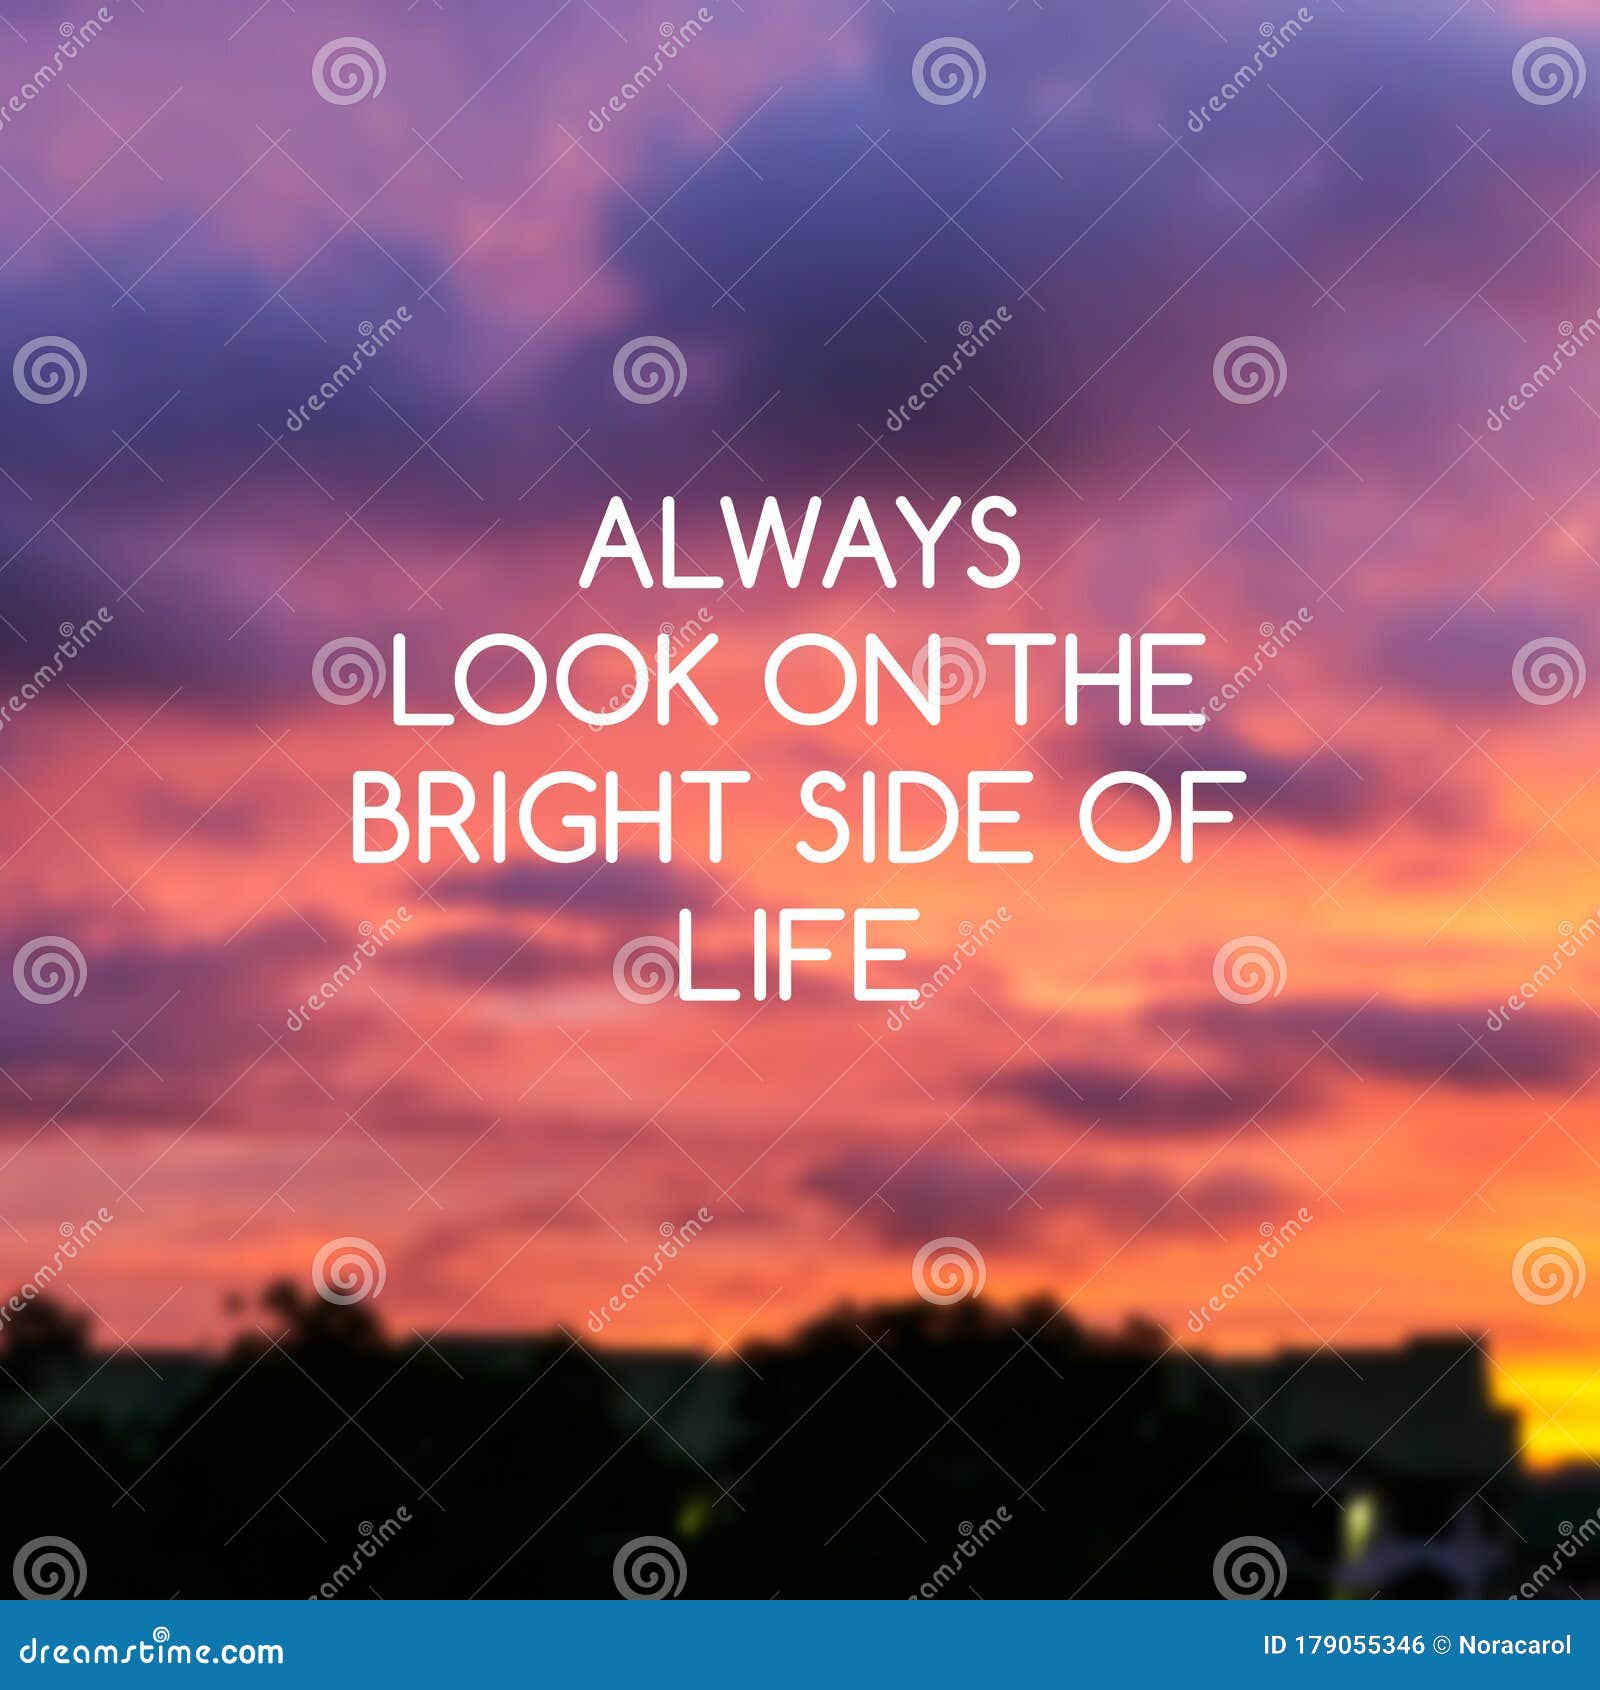 quotes-look-bright-side-life-inspirational-179055346.jpg